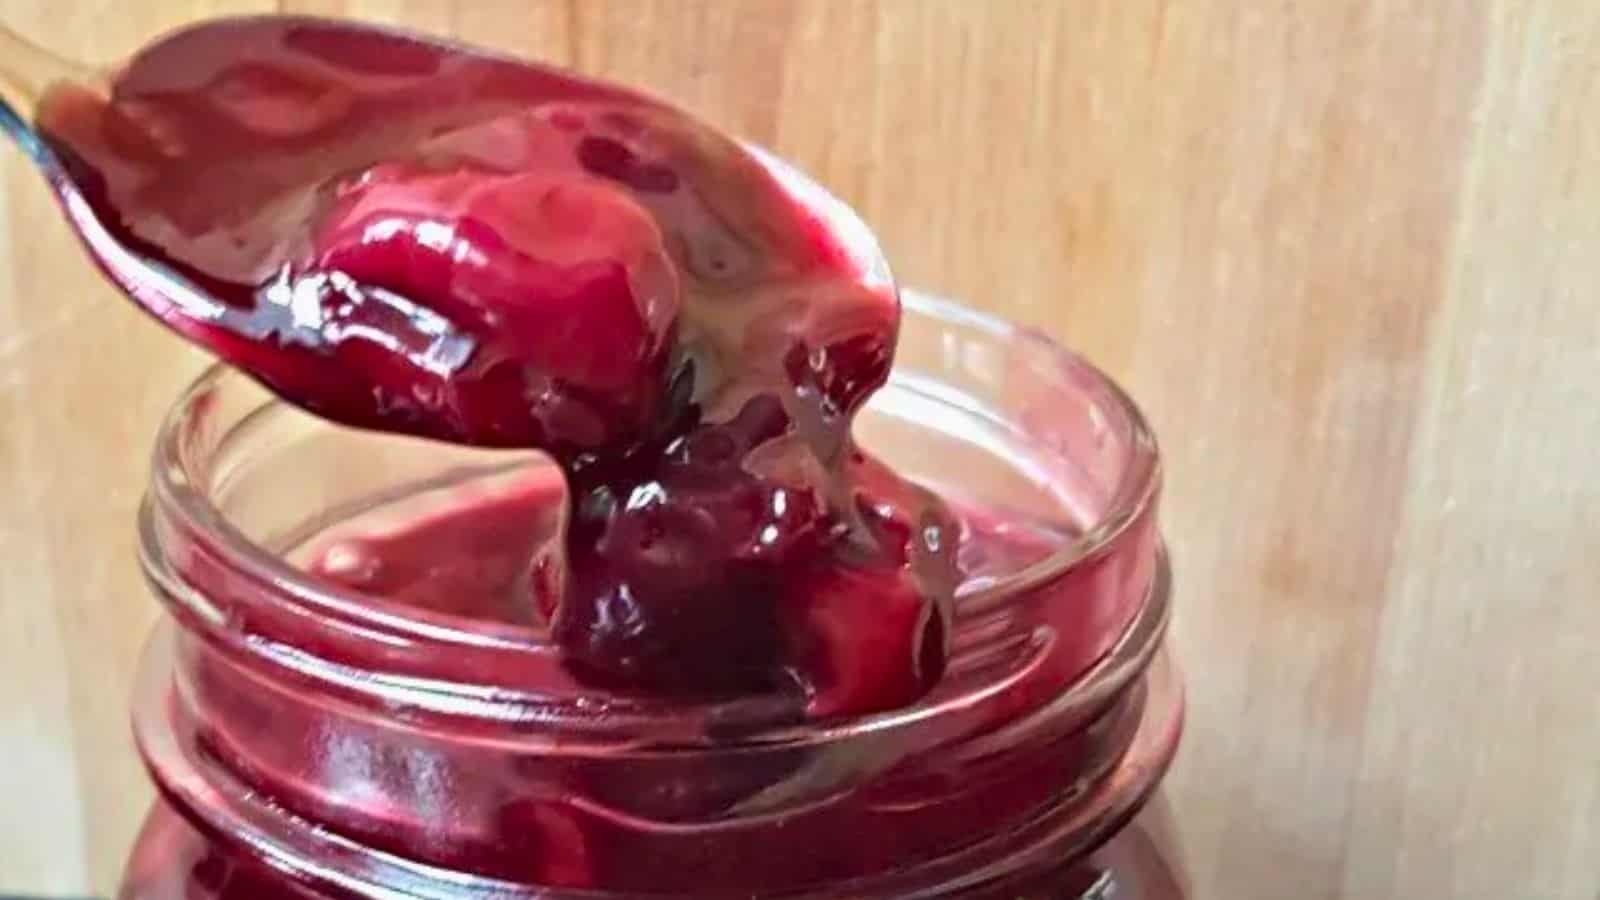 Image shows a close up of a jar of Cherry Syrup with a spoon holding some just above it.